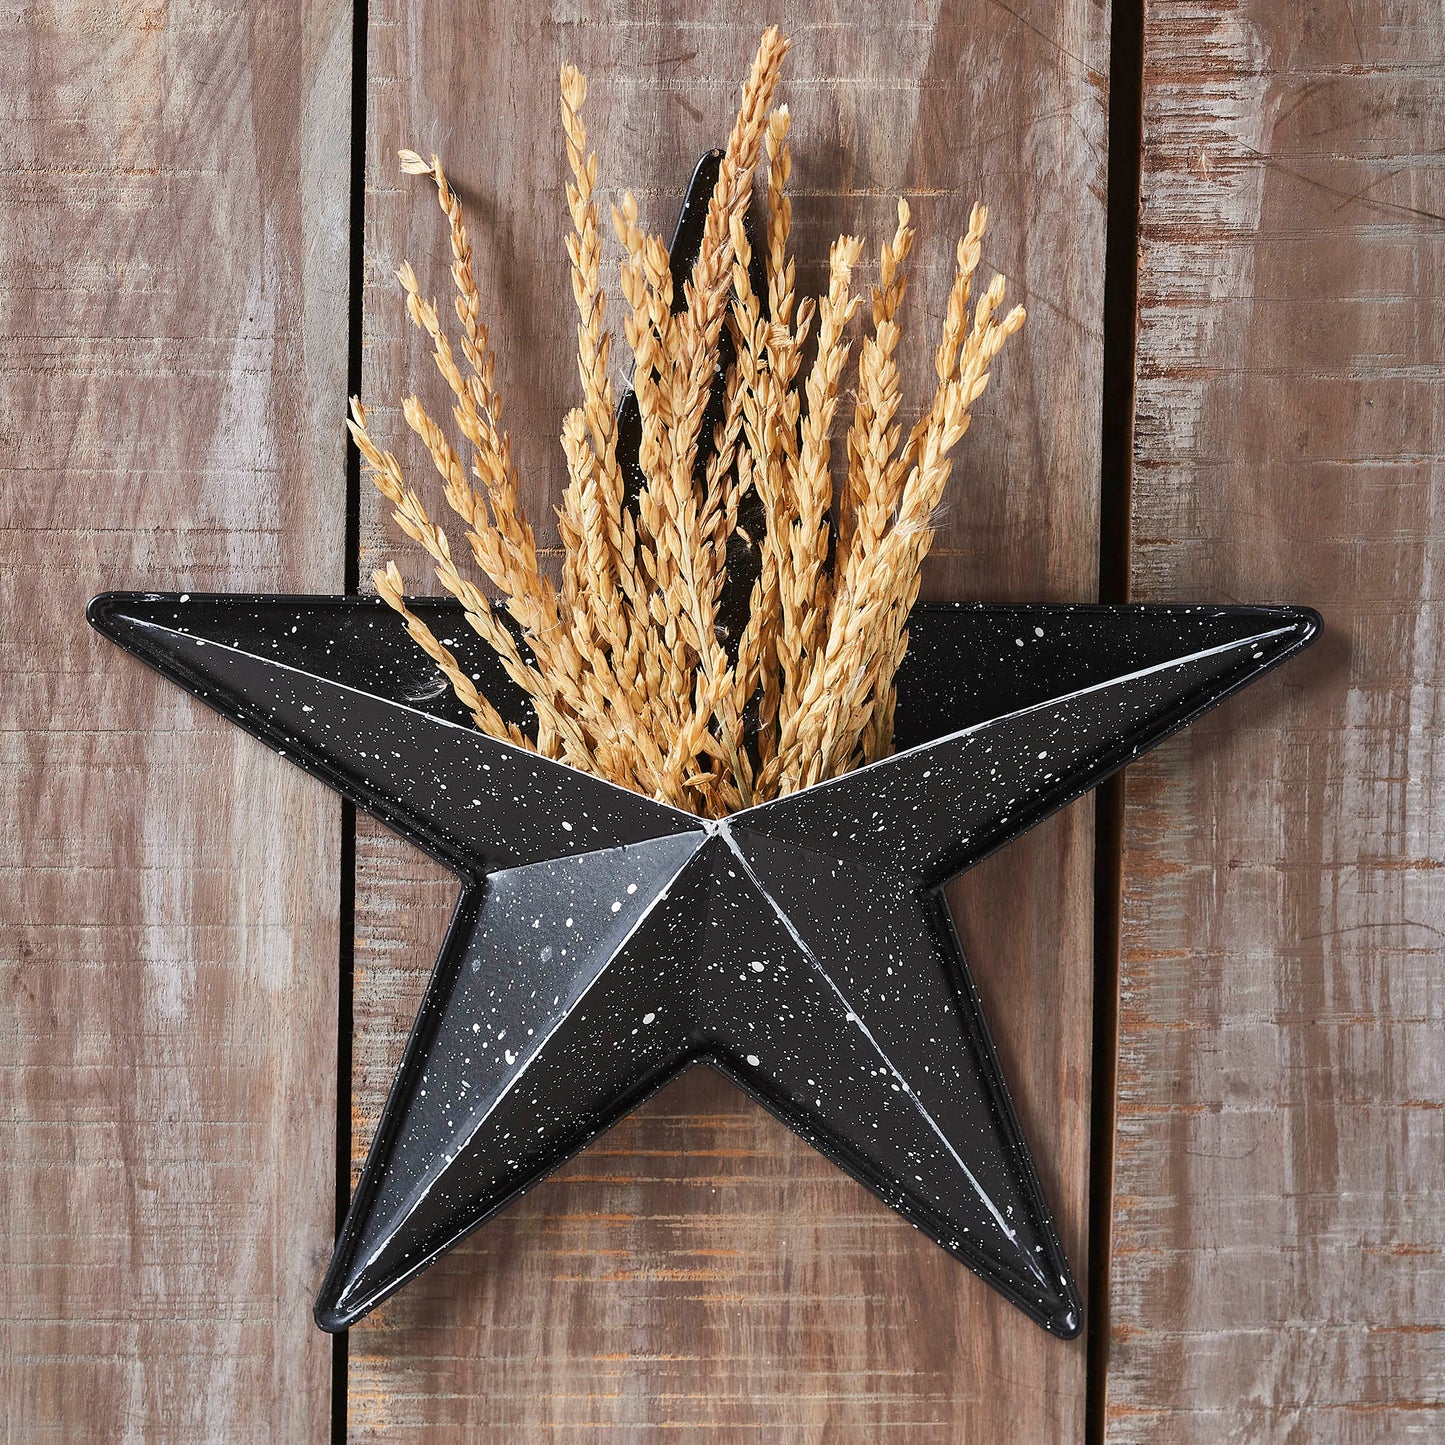 VHC Brands Patriotic Faceted Metal Star Black Wall Hanging w/ Pocket 12x12, Independence Day Decor, American Star with display pocket, Distressed Appearance Metal Wall Hanging,  Star Shape, Charcoal